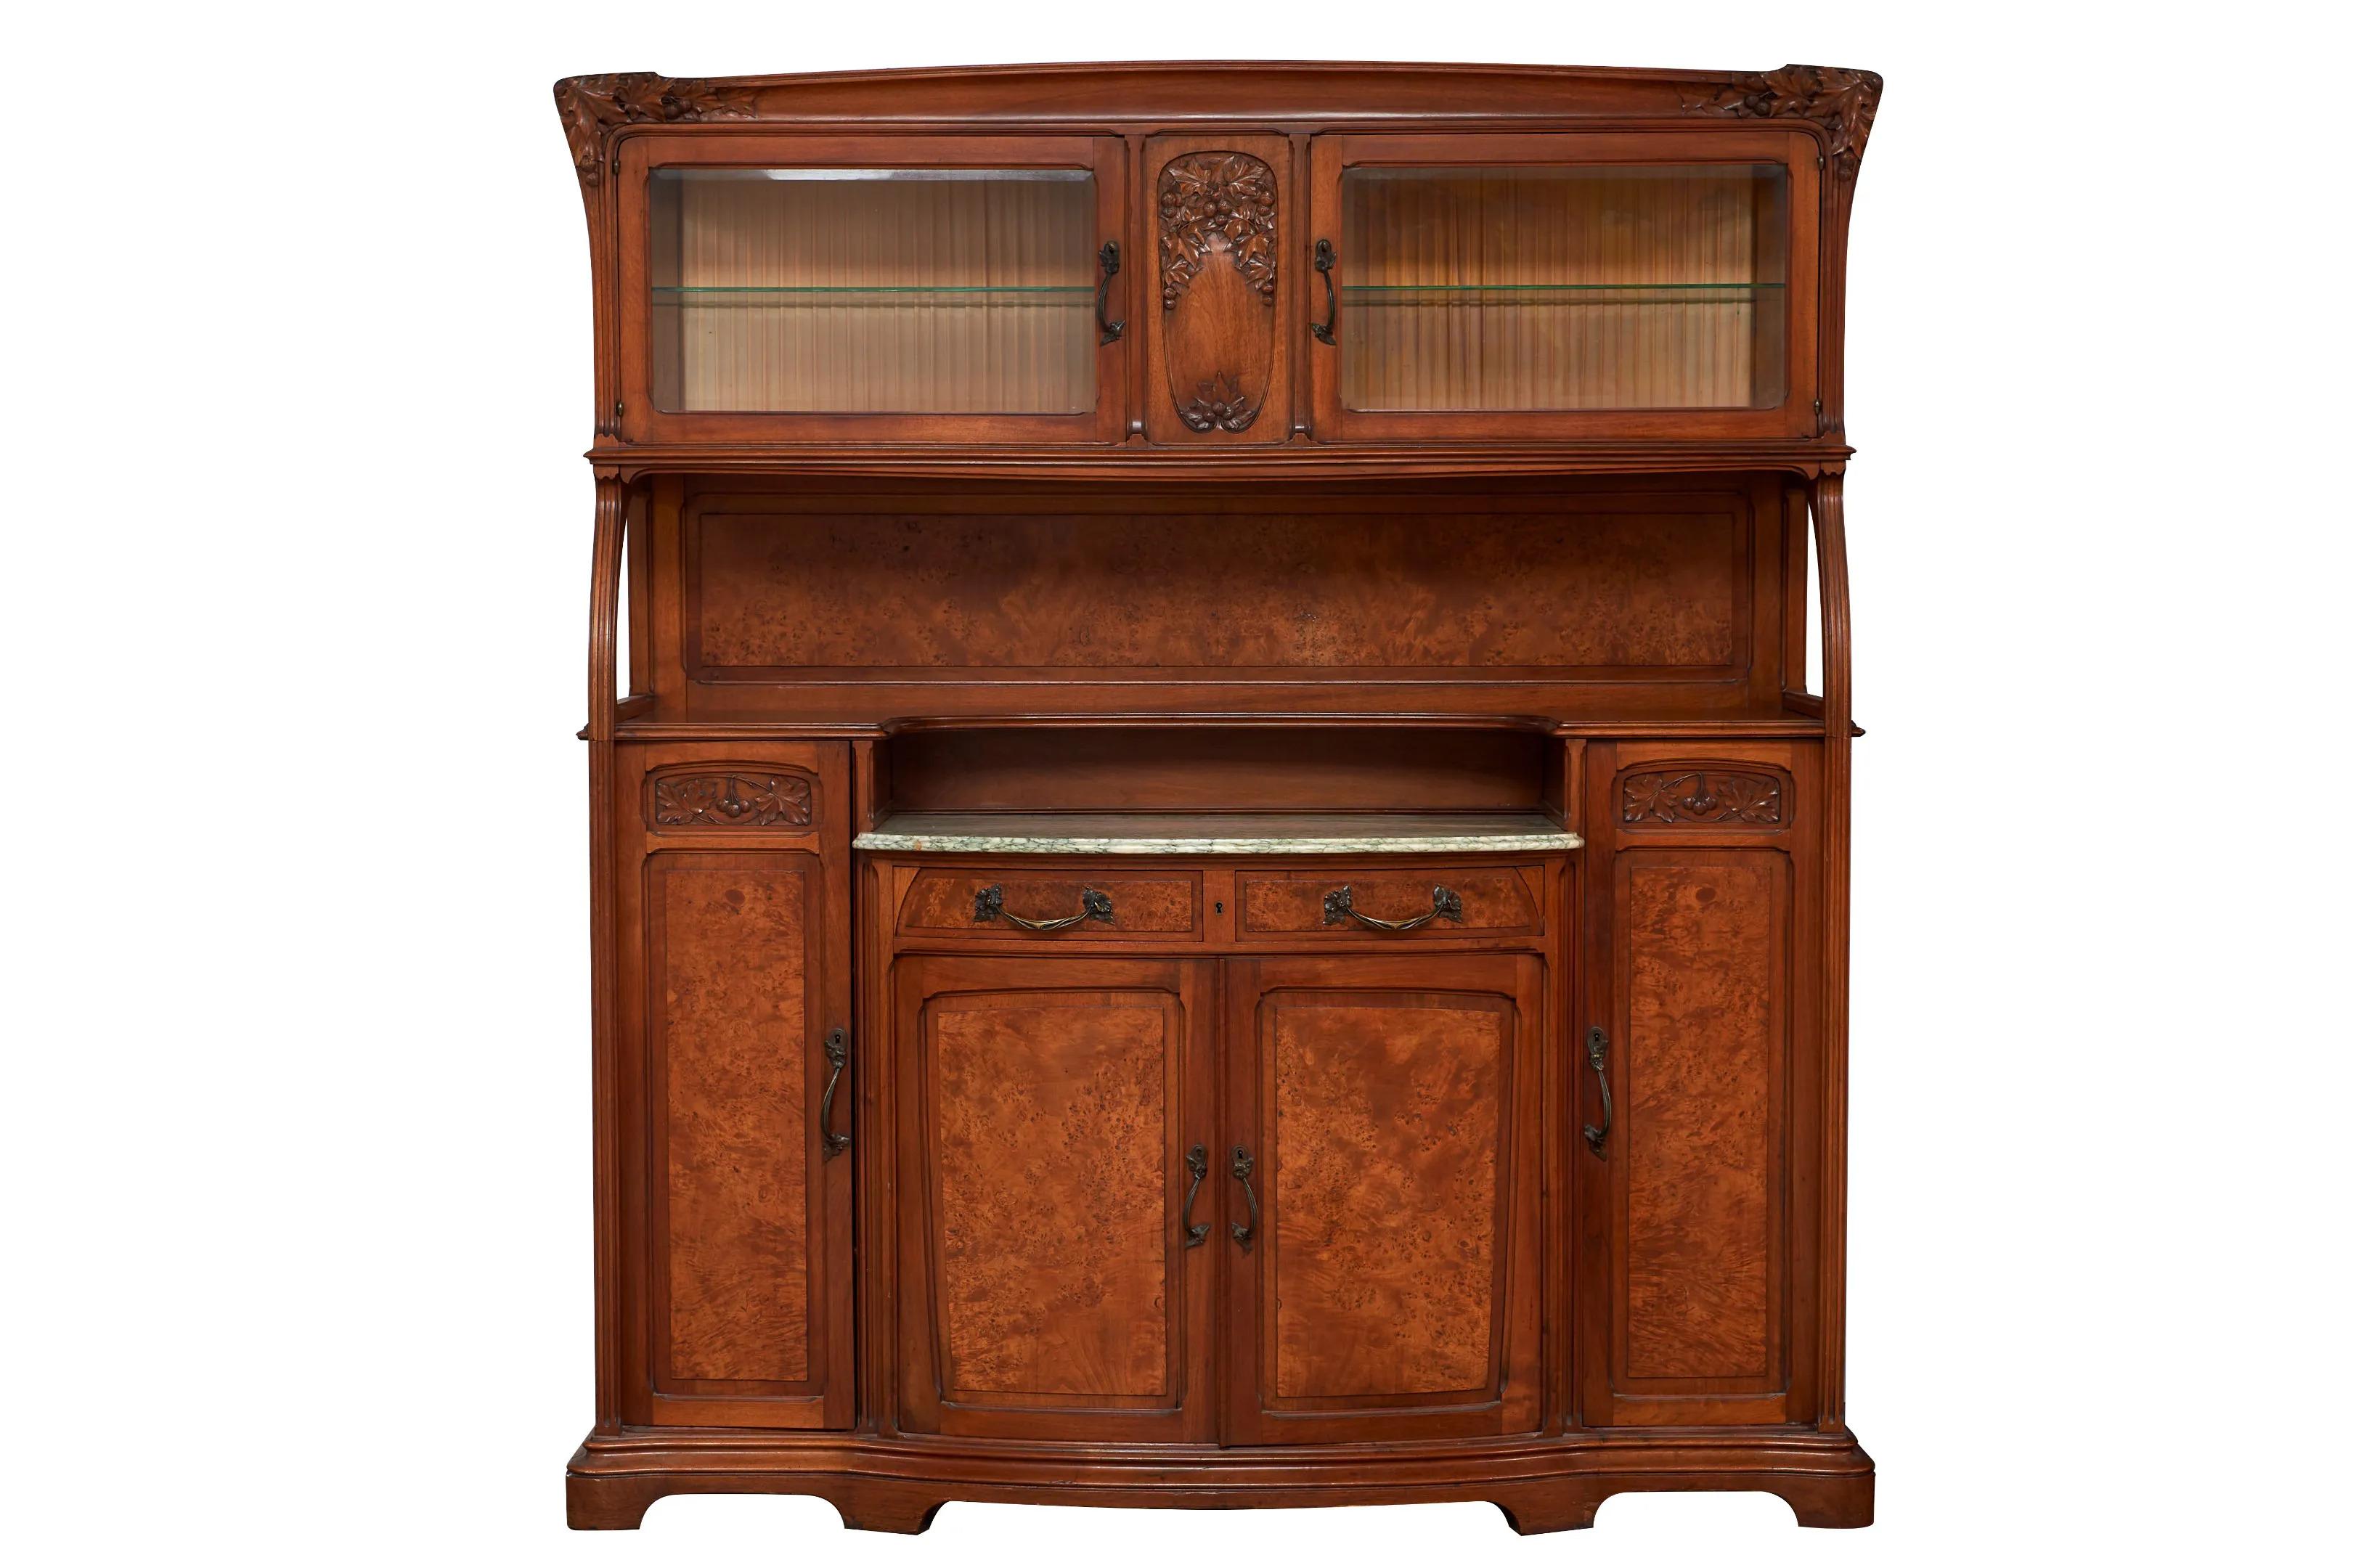 Attributed to GAUTHIER-POINSIGNON & Cie, Dining room furniture in walnut and elm burl veneer decorated with fruits and plane tree leaves (Platanus orientalis) and bronze ornamentation, Art Nouveau period, comprising: - a sideboard two bodies opening